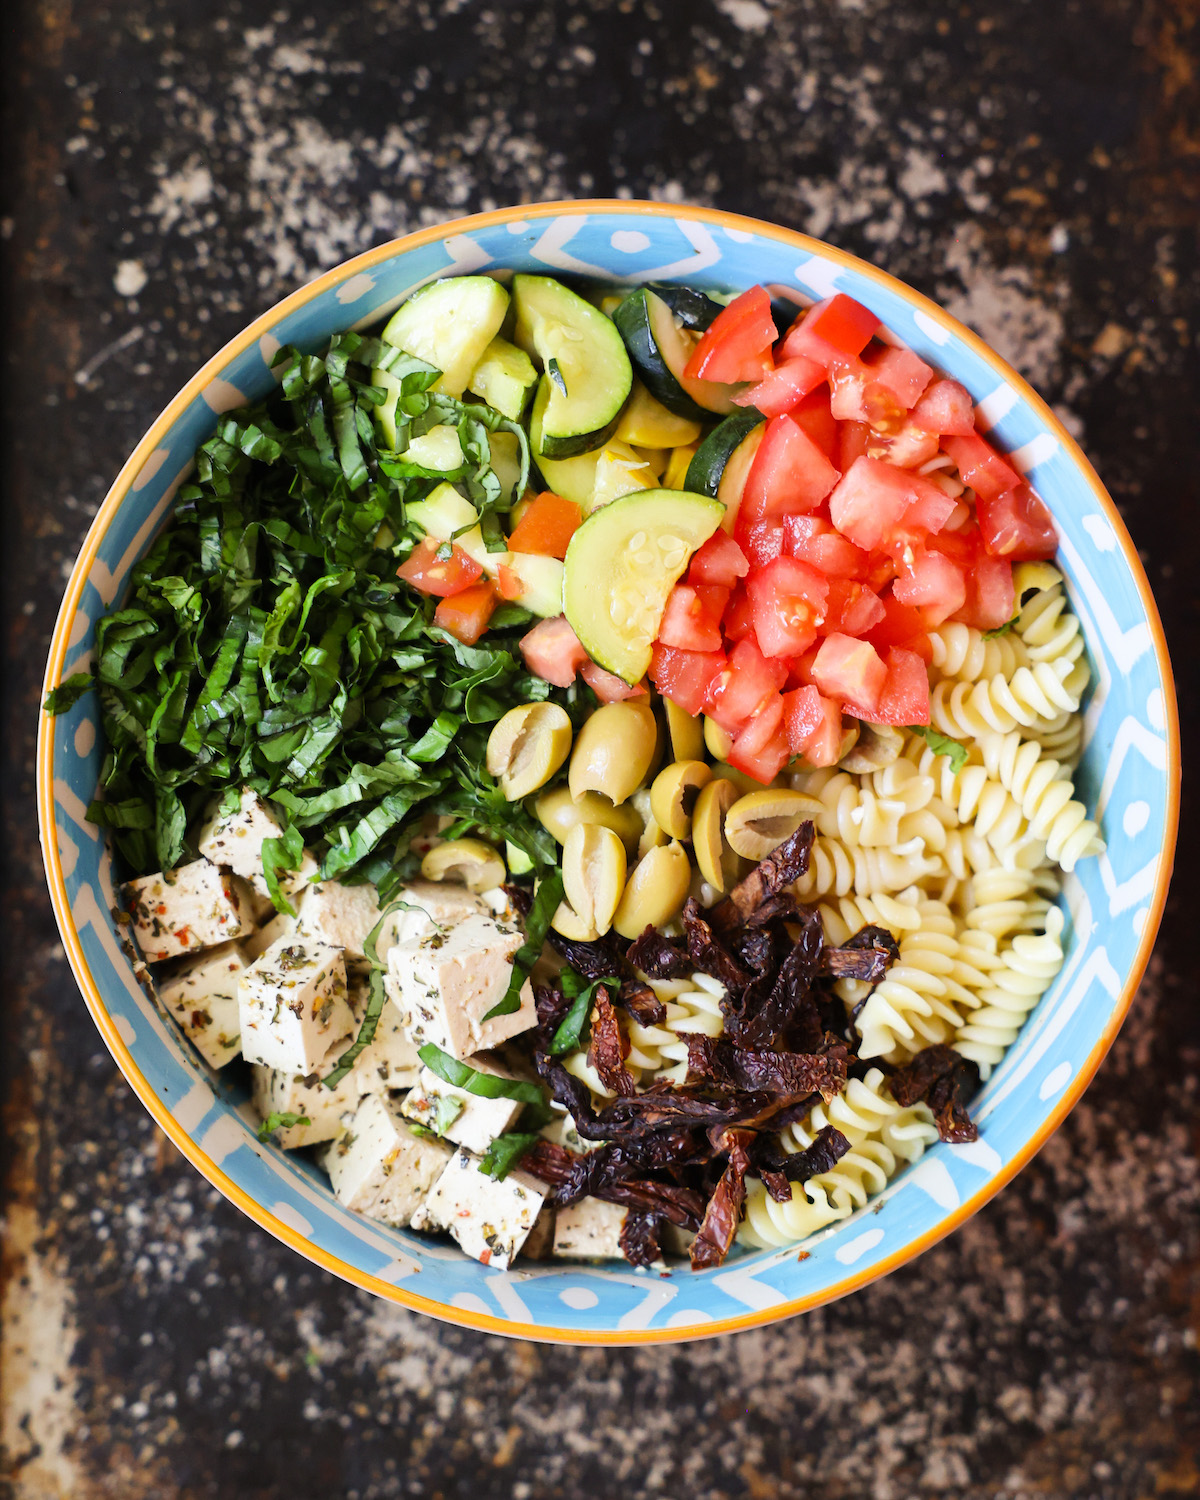 An overhead shot of a patterned blue bowl with pasta, veggies, and marinated tofu.